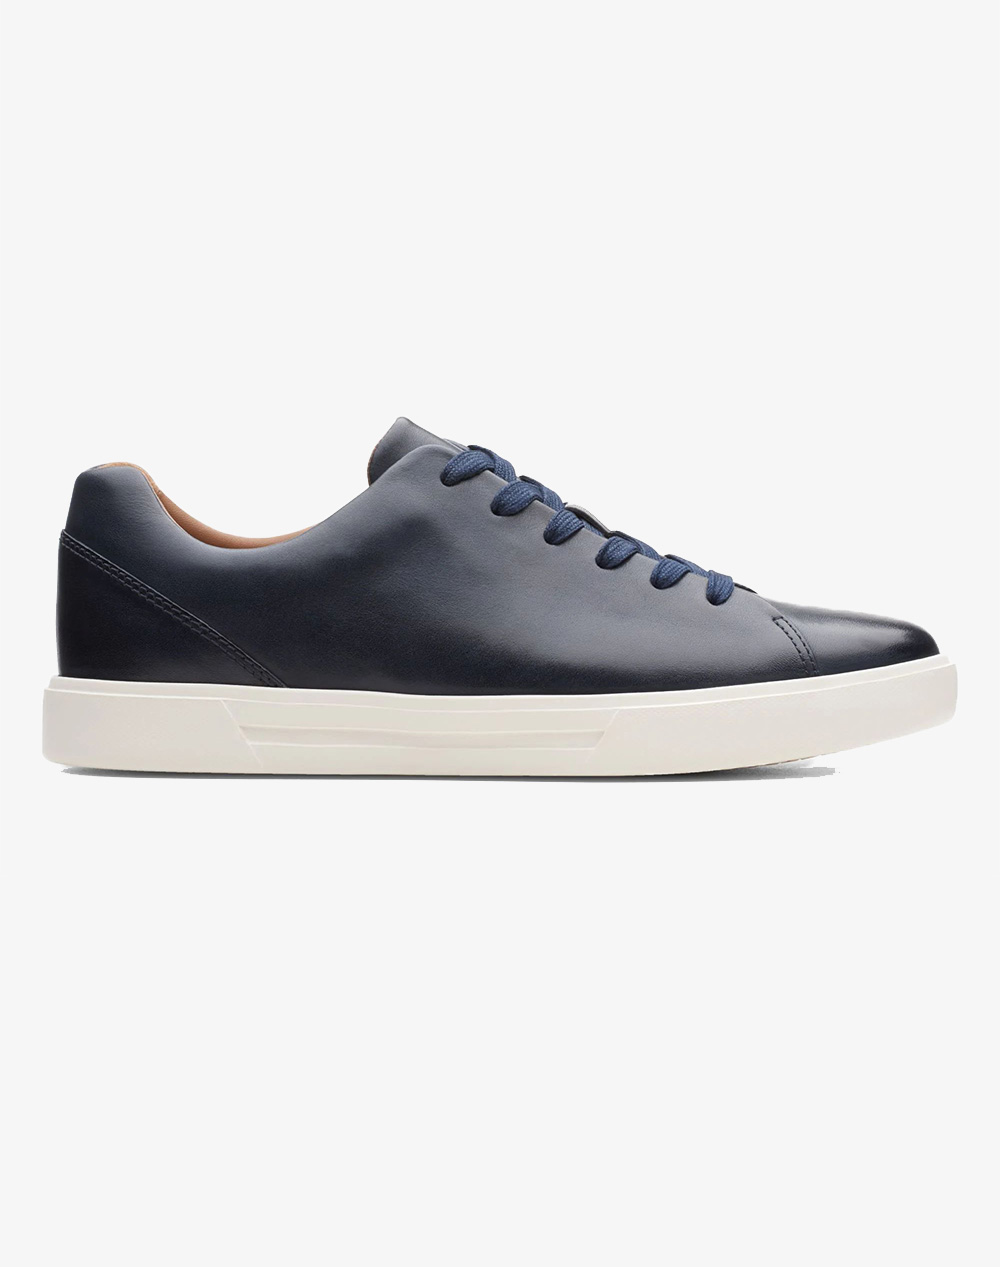 CLARKS Un Costa Lace Navy Leather 26148557-Lace DarkBlue 3820ACLAR6040004_XR28162